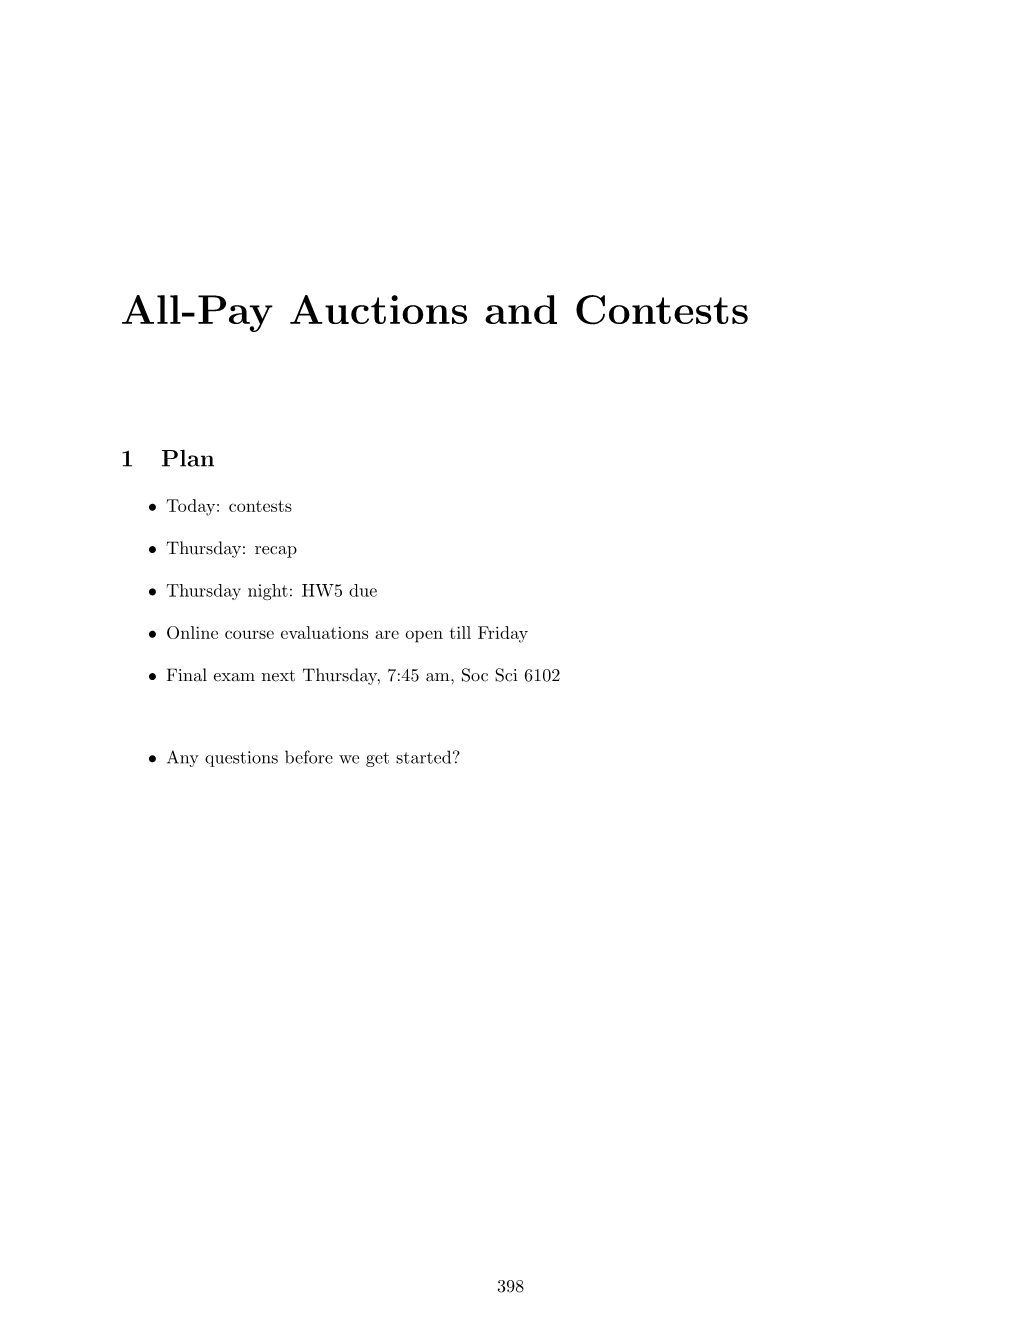 All-Pay Auctions and Contests